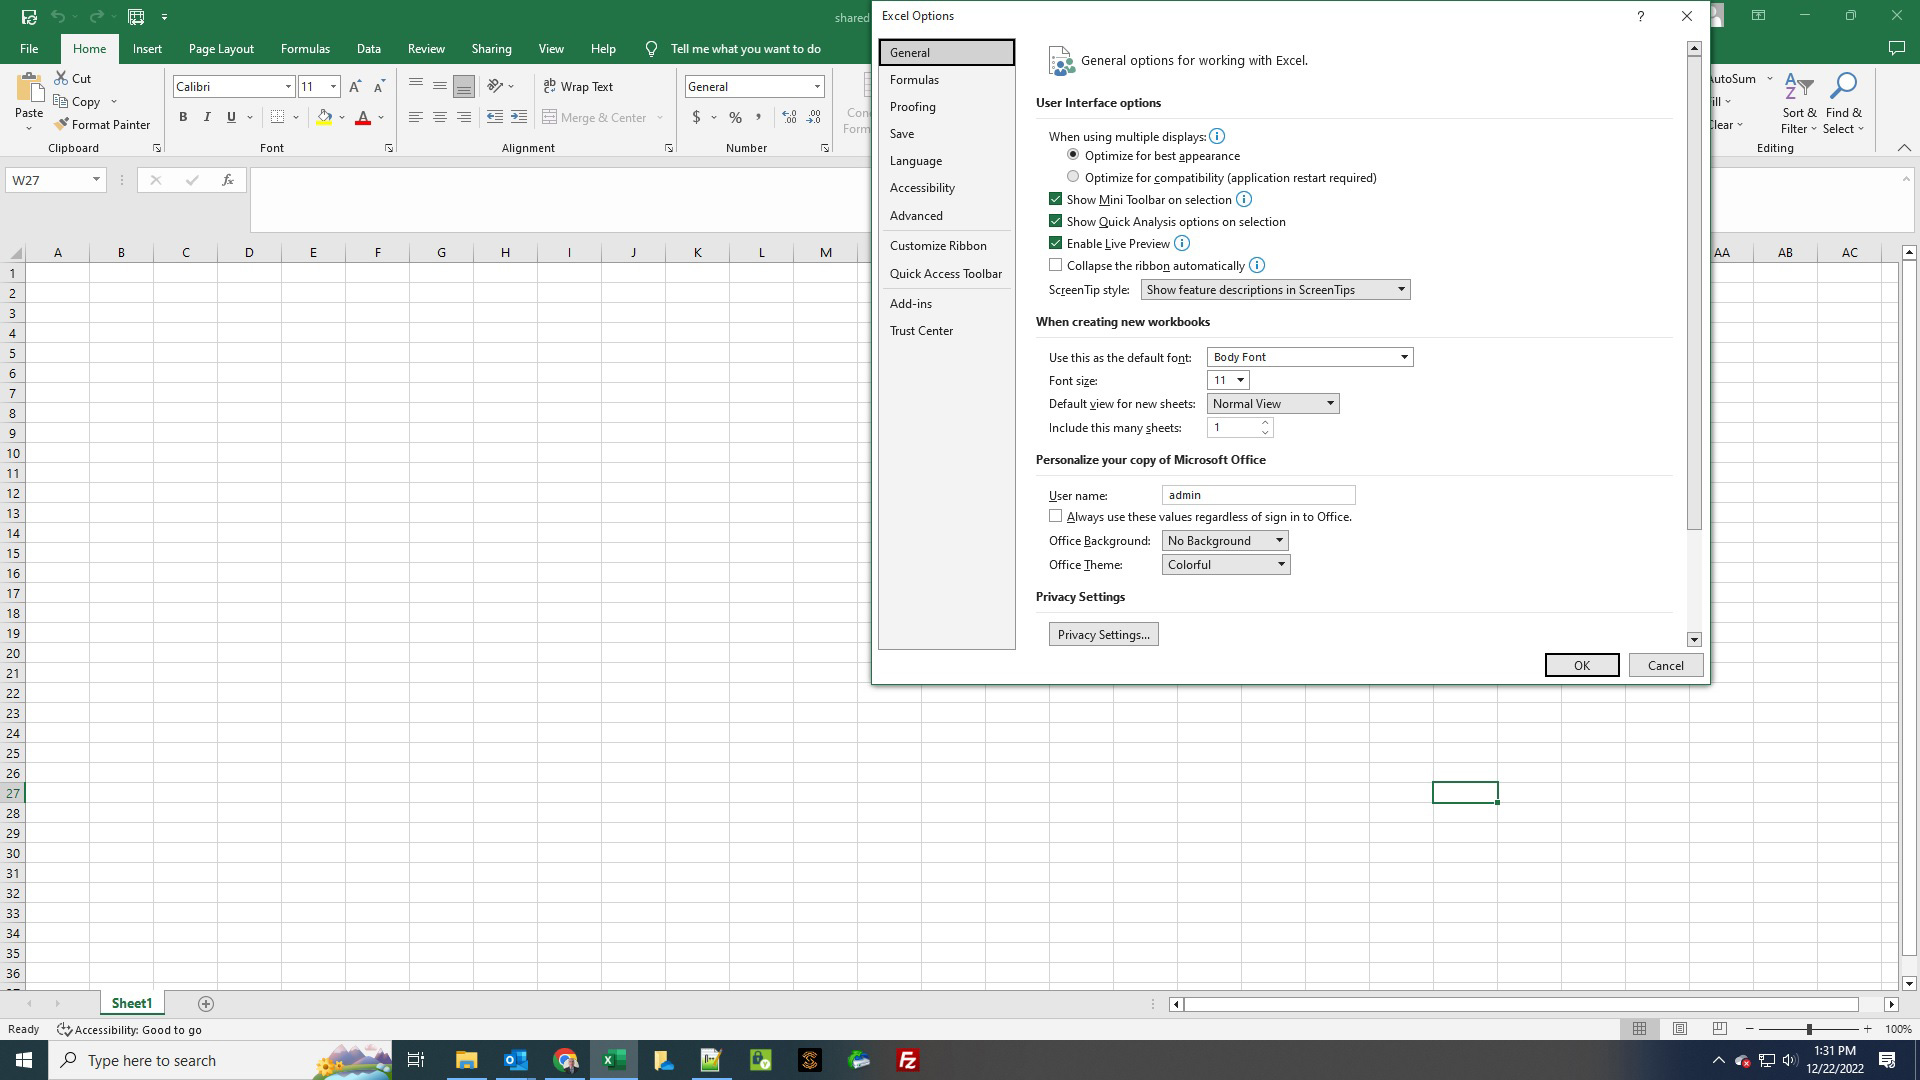 Excel Spreadsheet select Files then Options